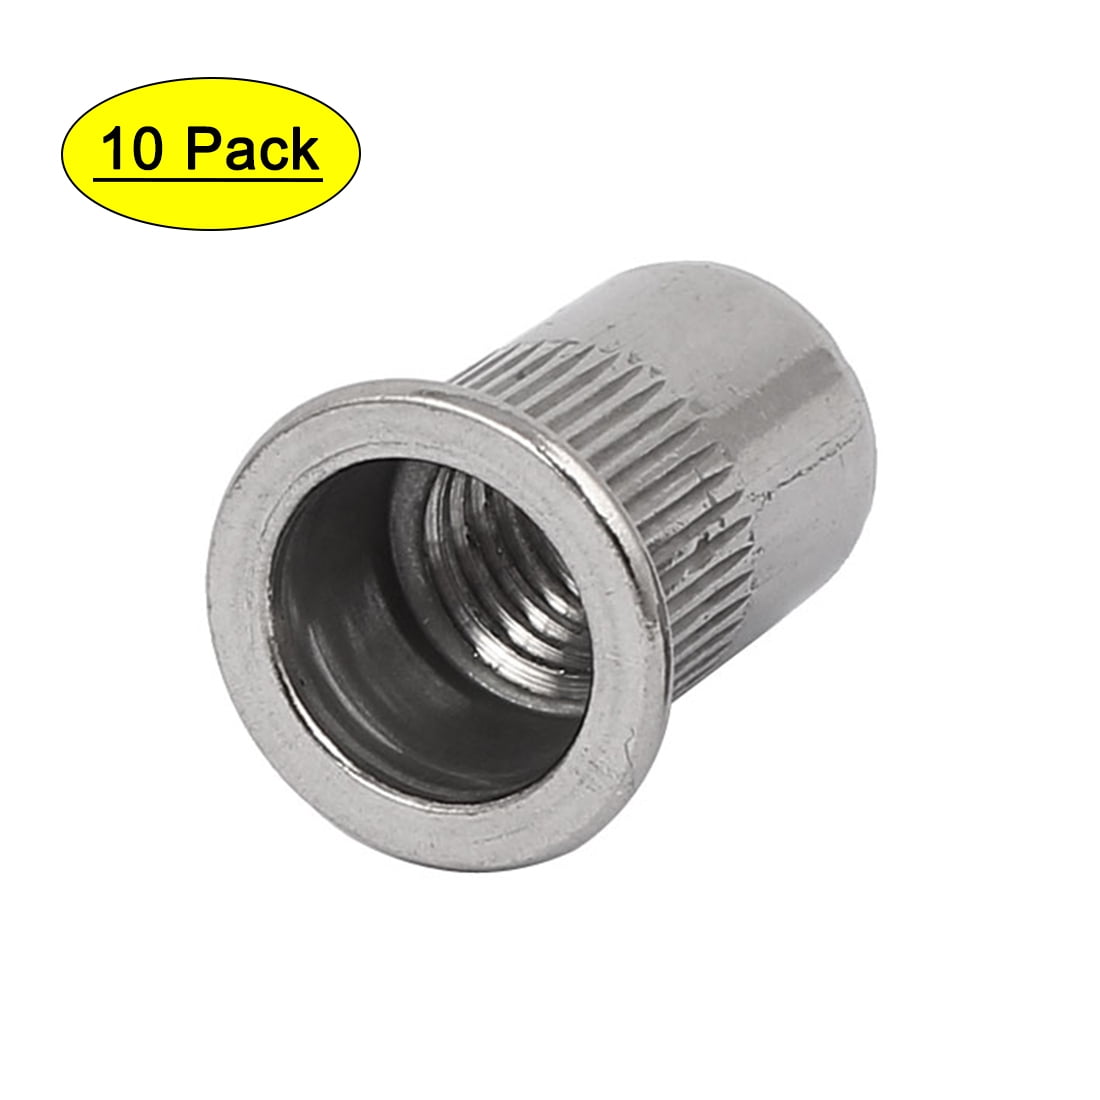 Details about   Rivet Nuts 900pcs/1200pcsFastener Nuts Hex Nuts Riveter Nuts M3-M12 US STOCK 